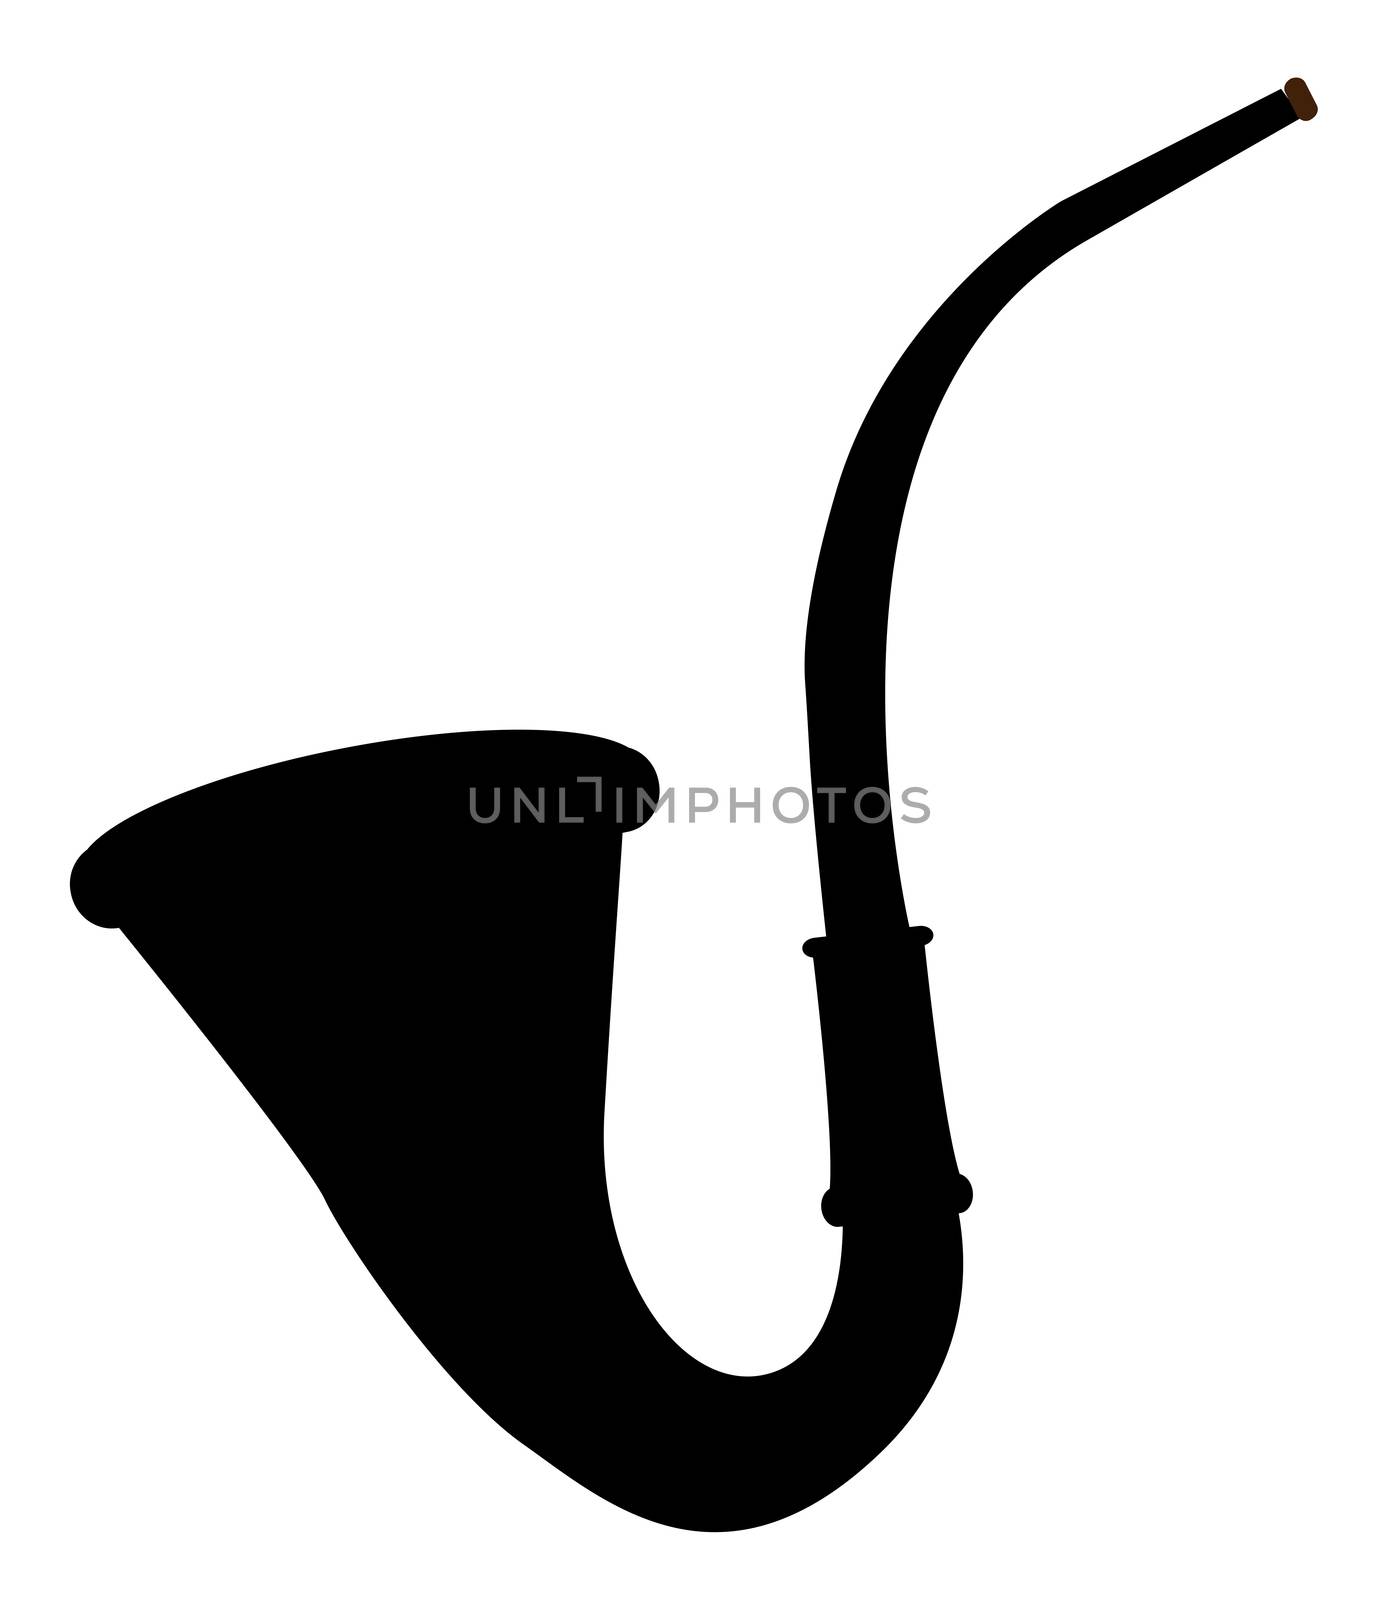 A trypical old fashioned pipe in silhouette as used by mythical detectives on a white background